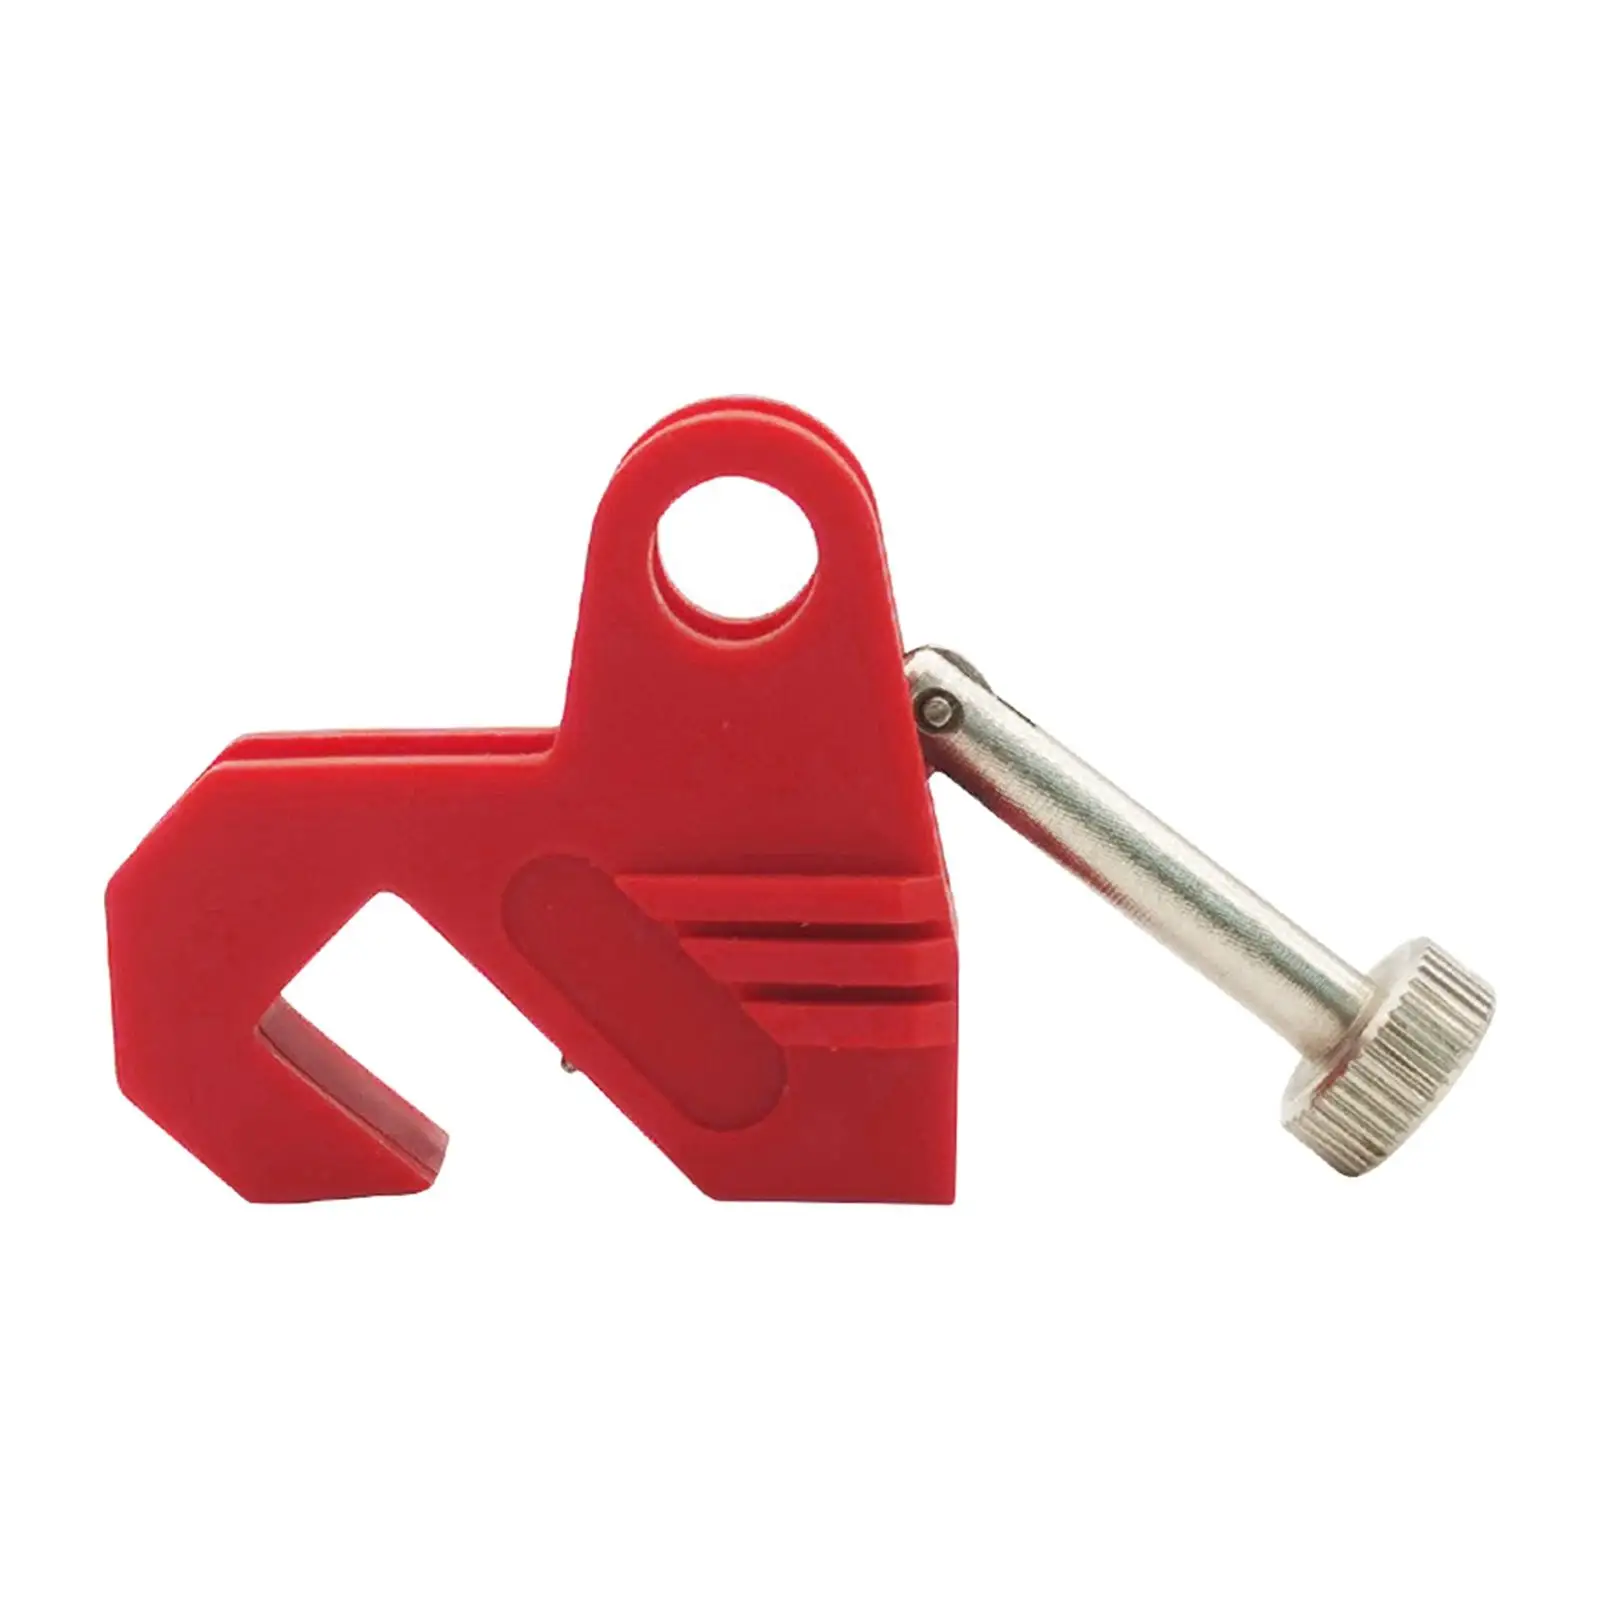 Circuit , Reinforced PA Nylon with Gold Screw Knob Safety Locks Wide Application Easy Installation